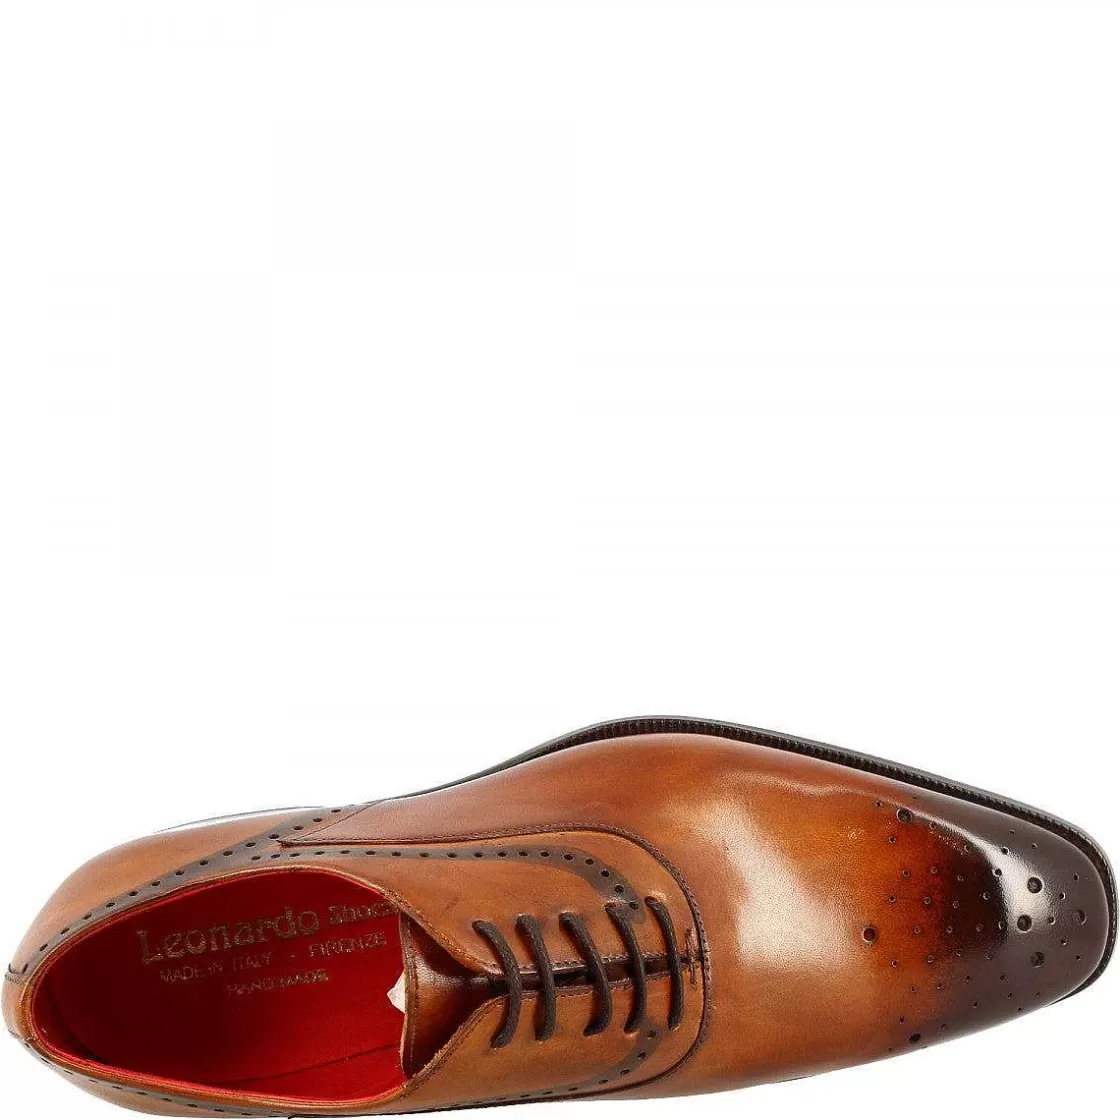 Leonardo Handmade Men'S Oxford Shoes With Square Toe In Faded Siena Leather Online